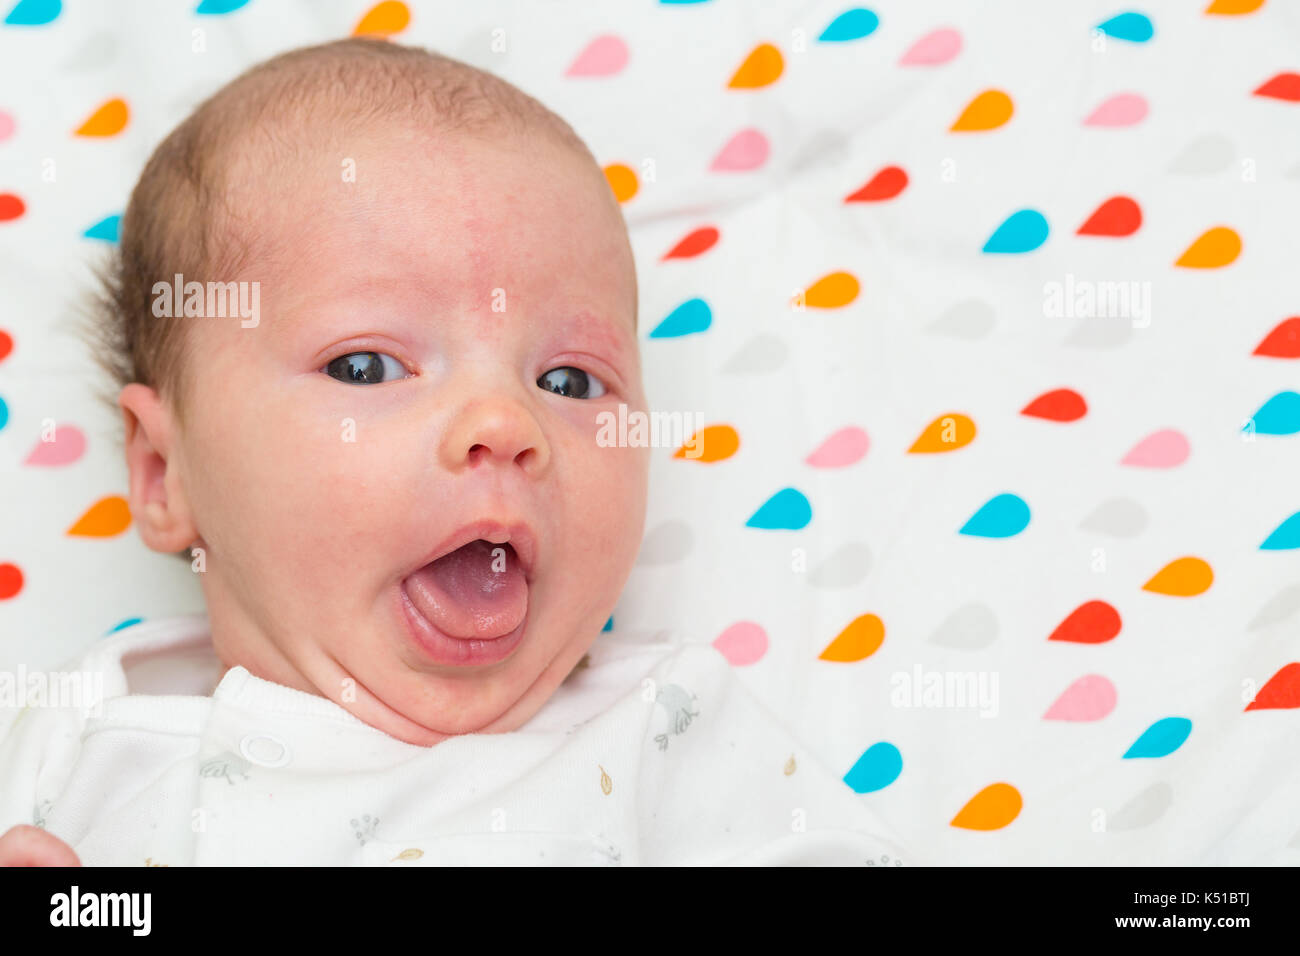 Portrait of a newborn baby looking at the camera with her mouth and eyes wide open Stock Photo